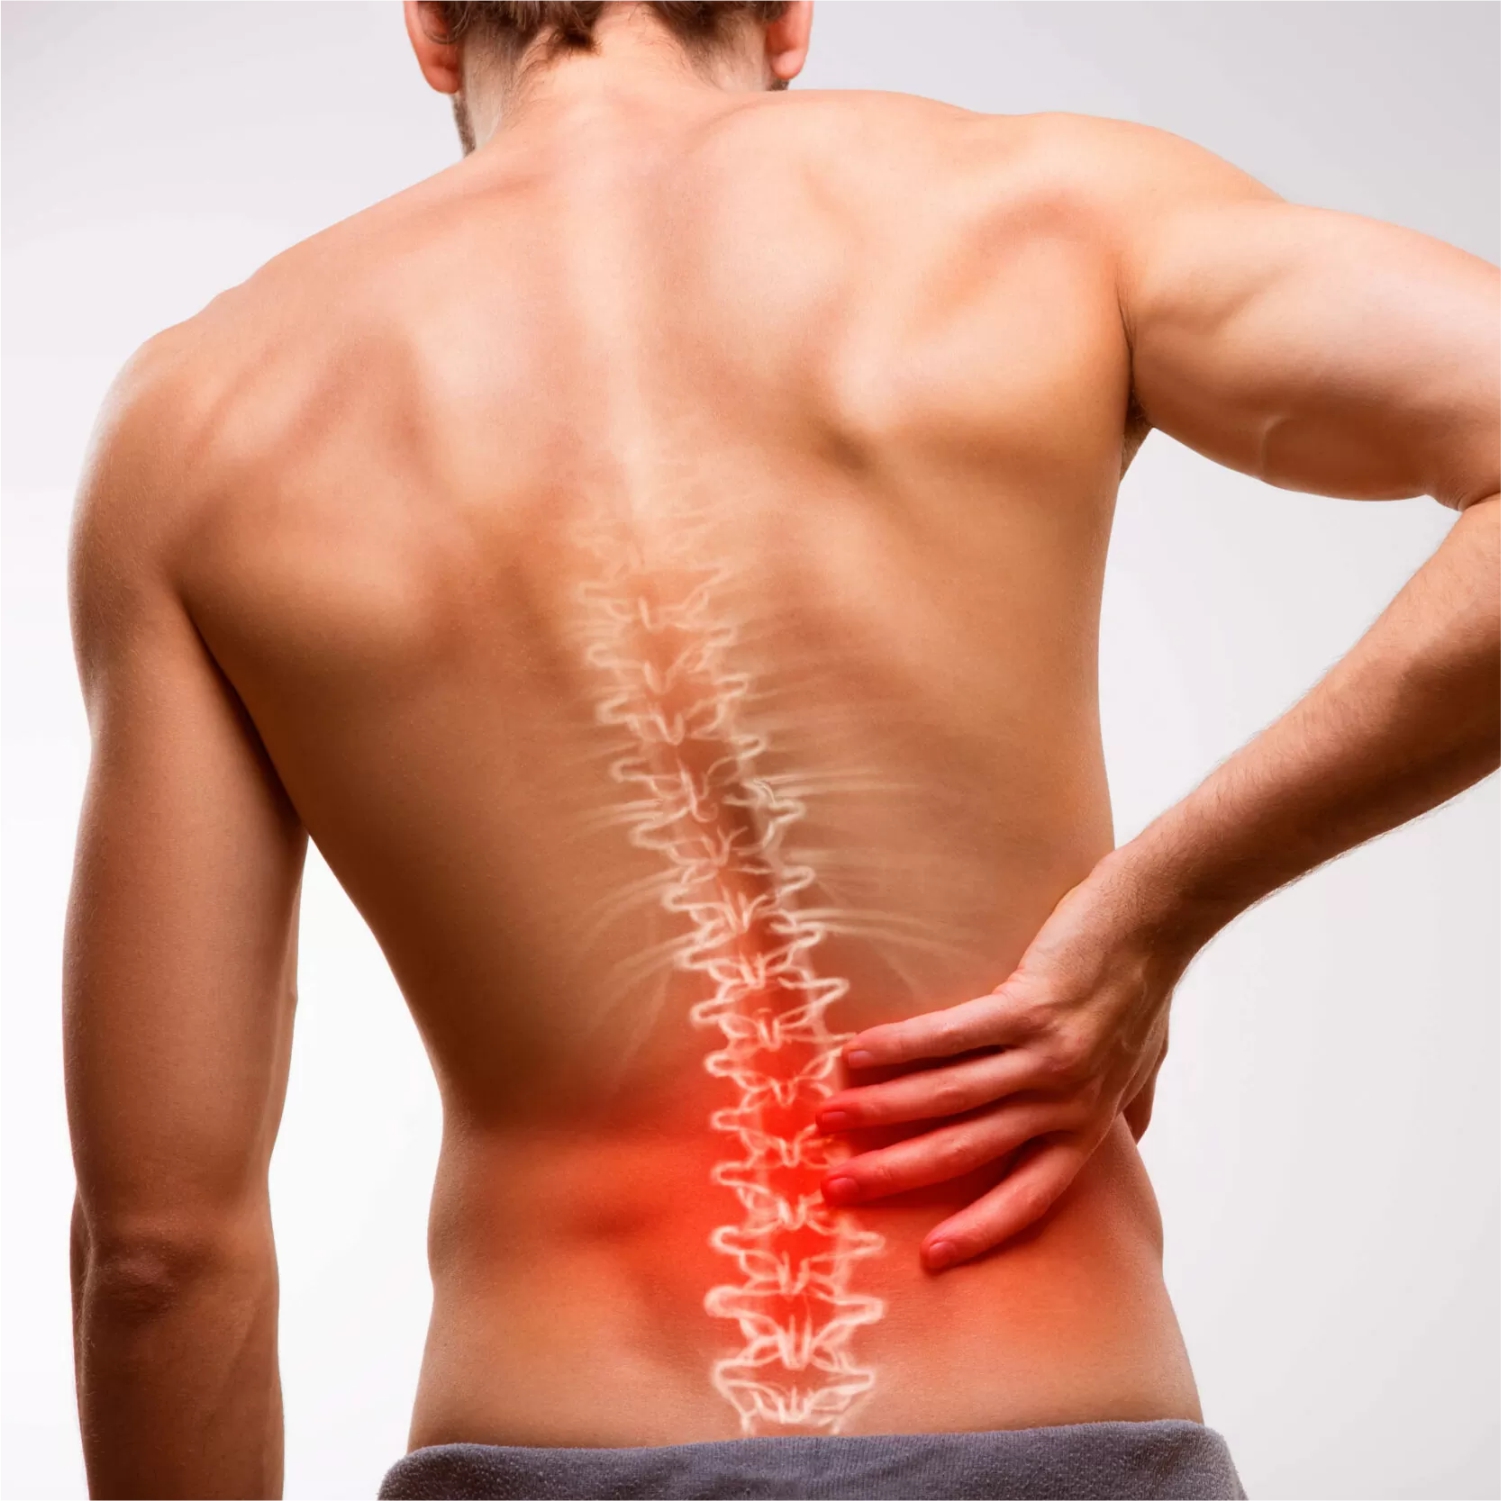 Back pain home remedies